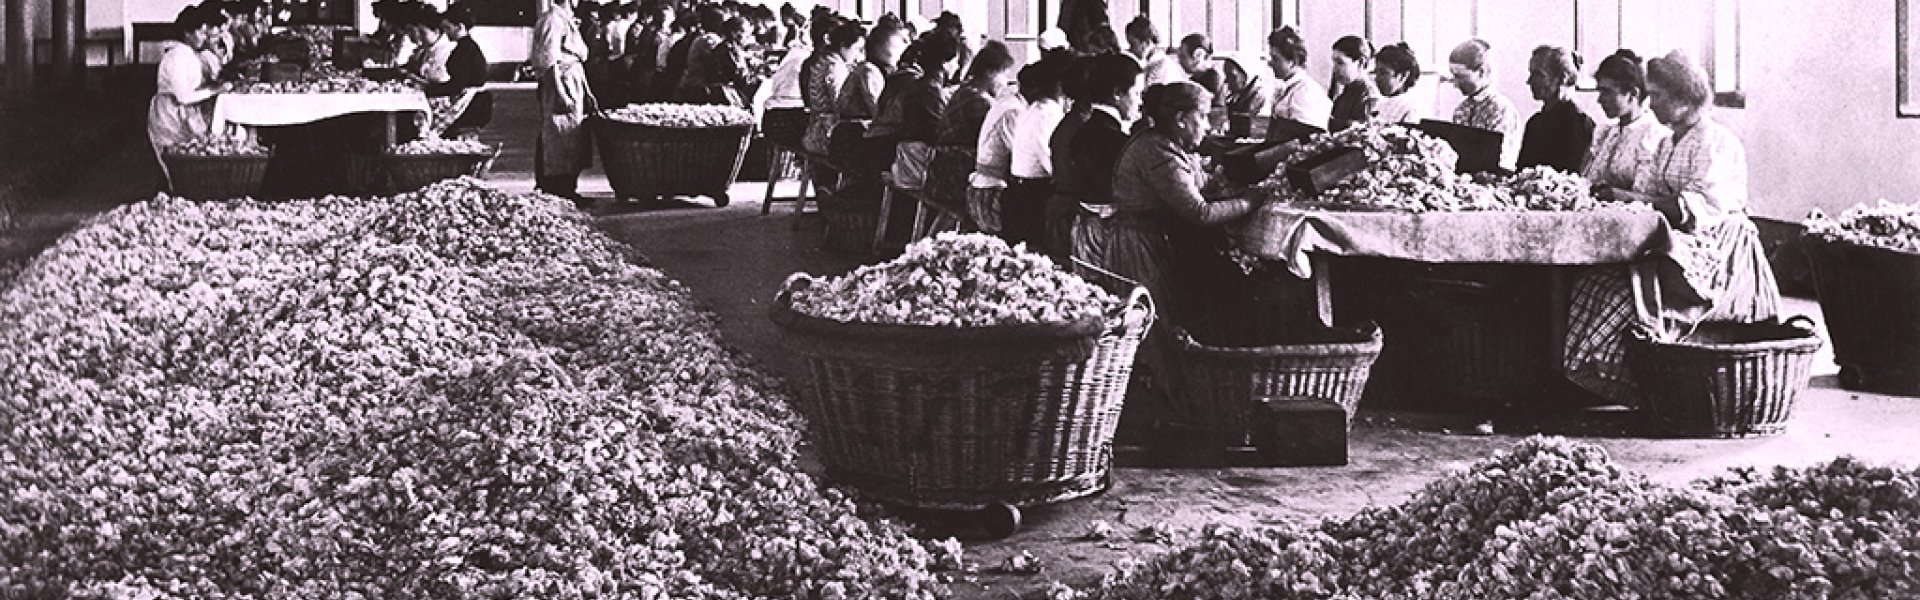 Collecting roses in Grasse, early 20th Century